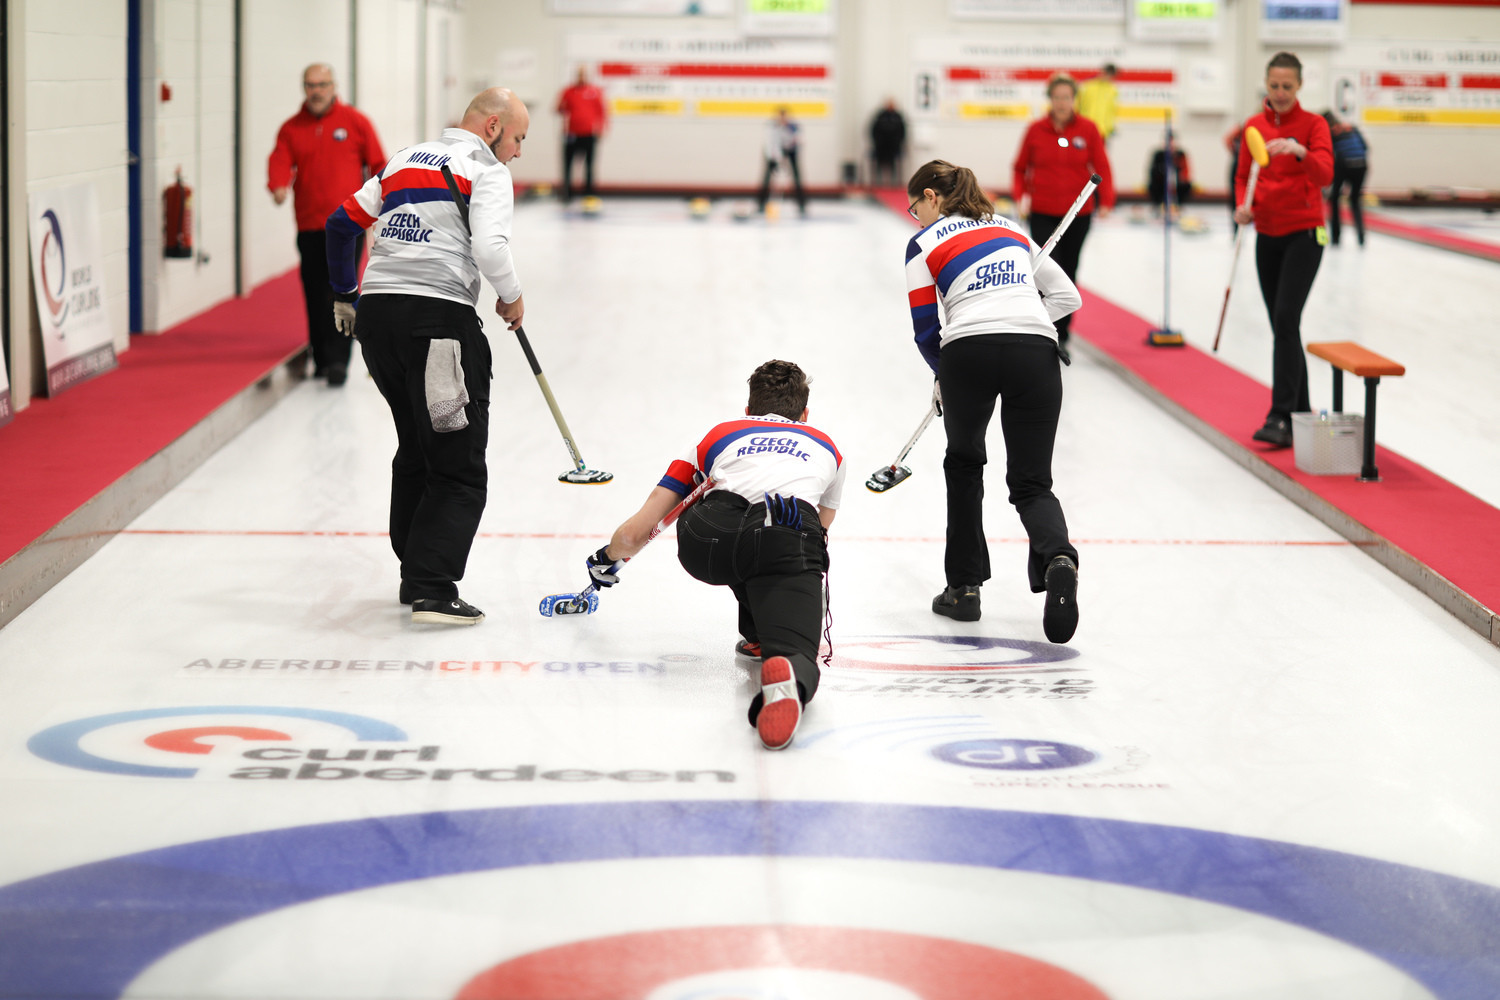 Czech Republic are in a three-way tie for first place in Group B ©WCF/Stephen Fisher